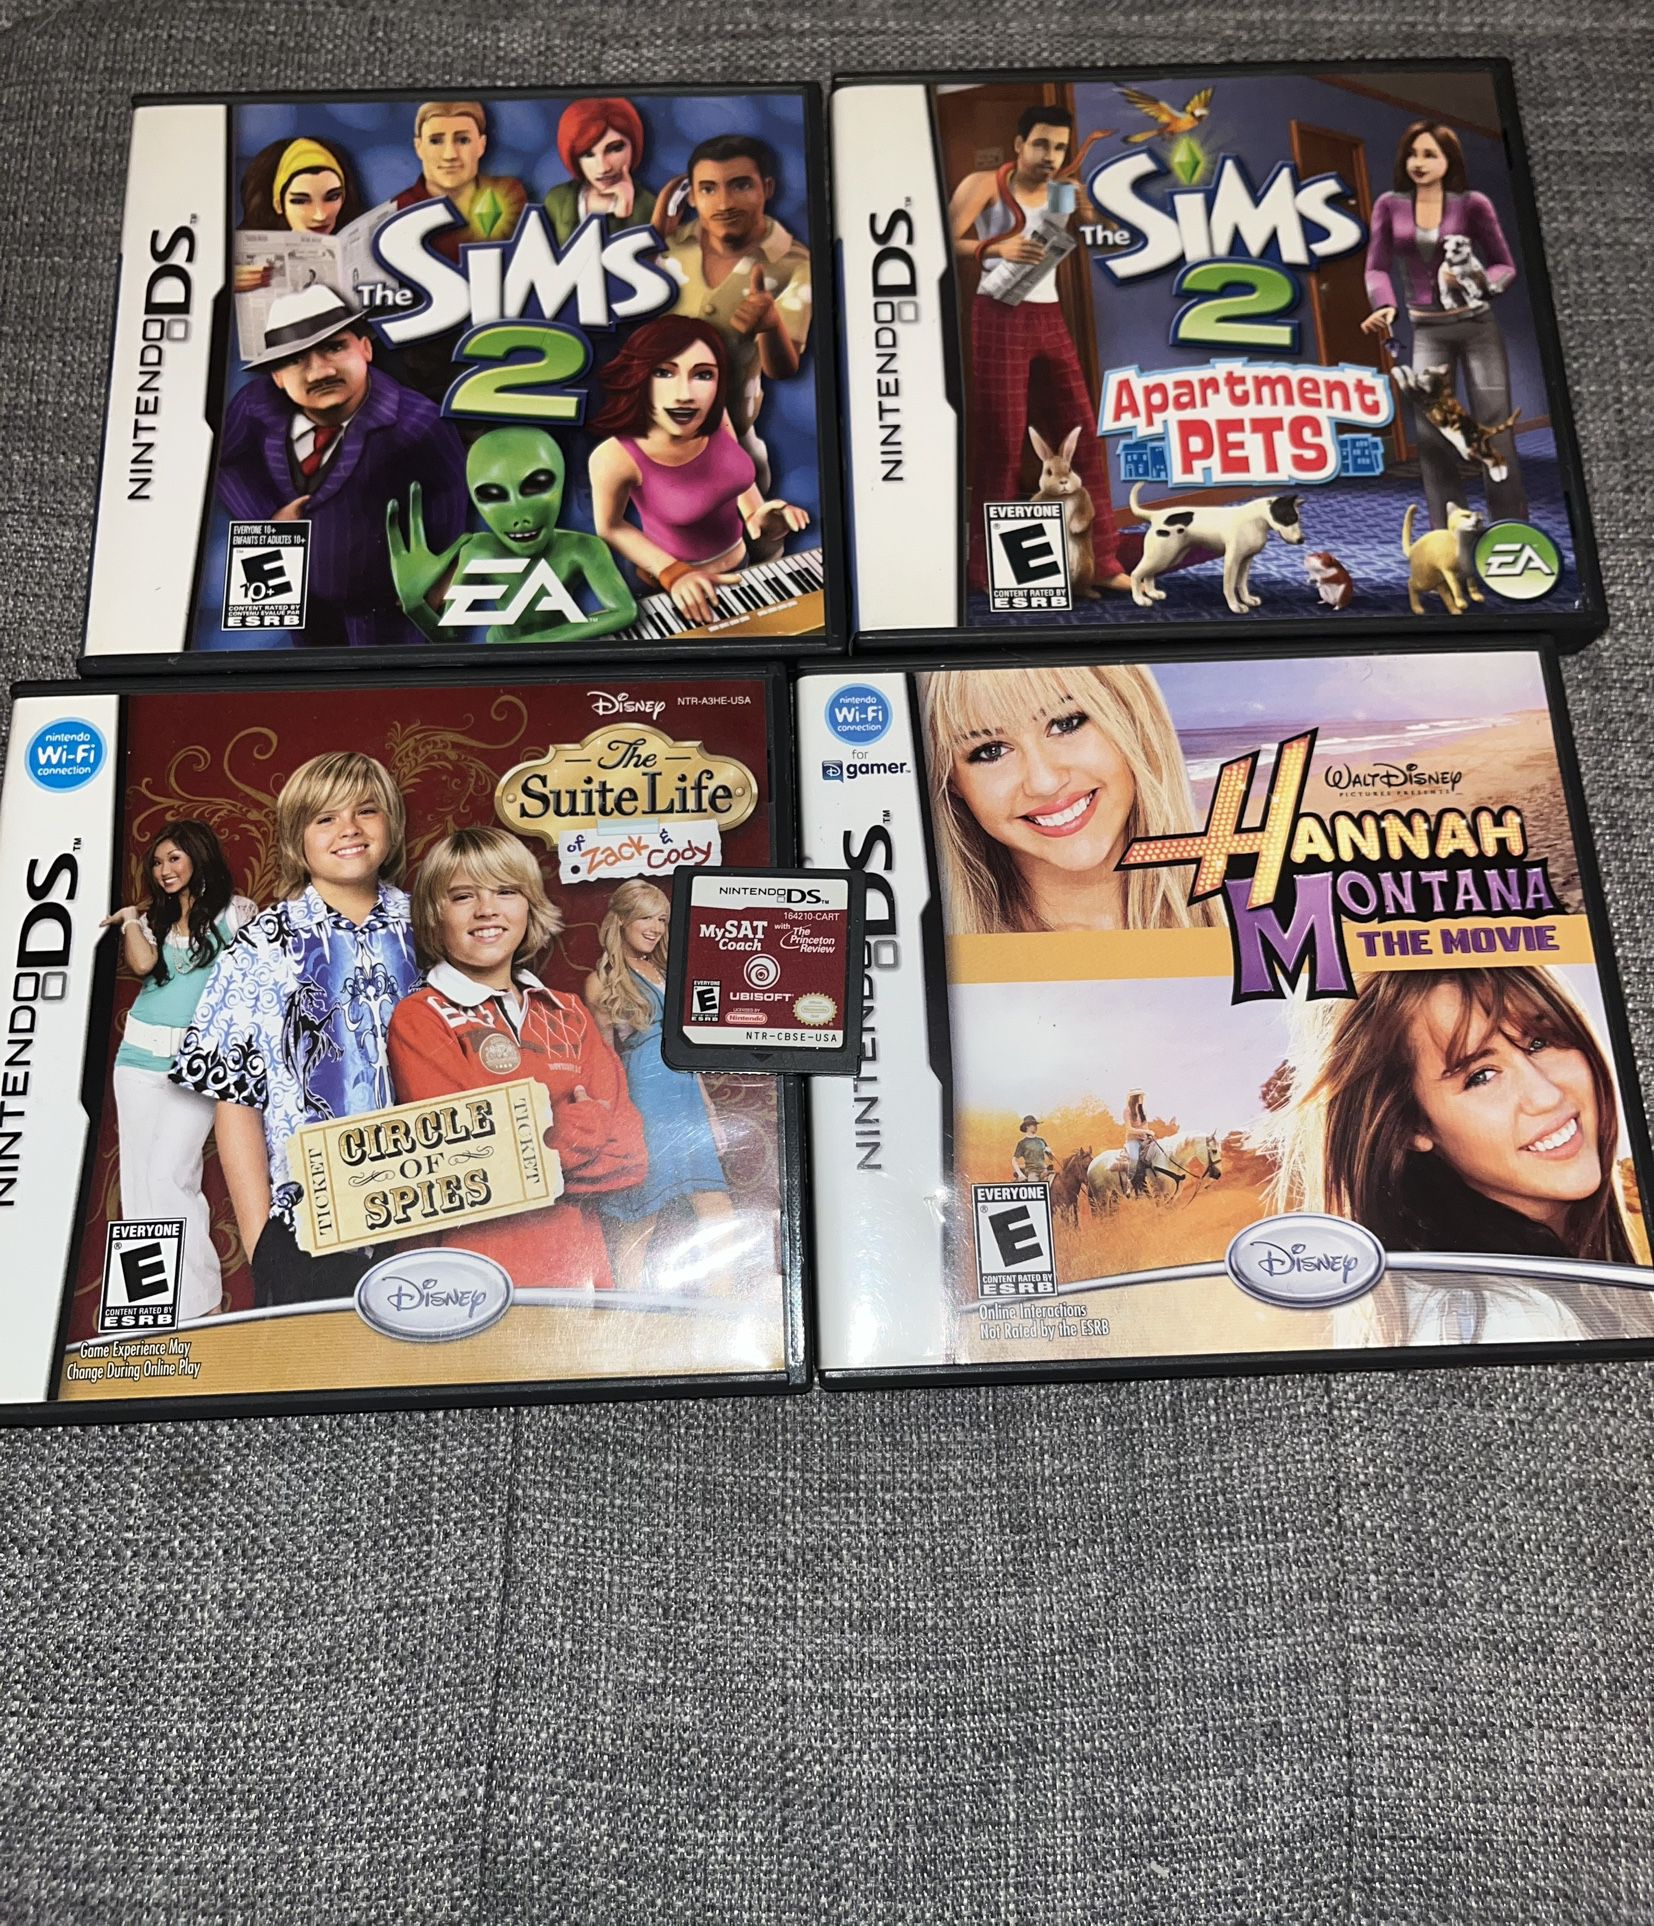 The Sims 2 (Nintendo DS, 2005) Nintendo DS Game Lot